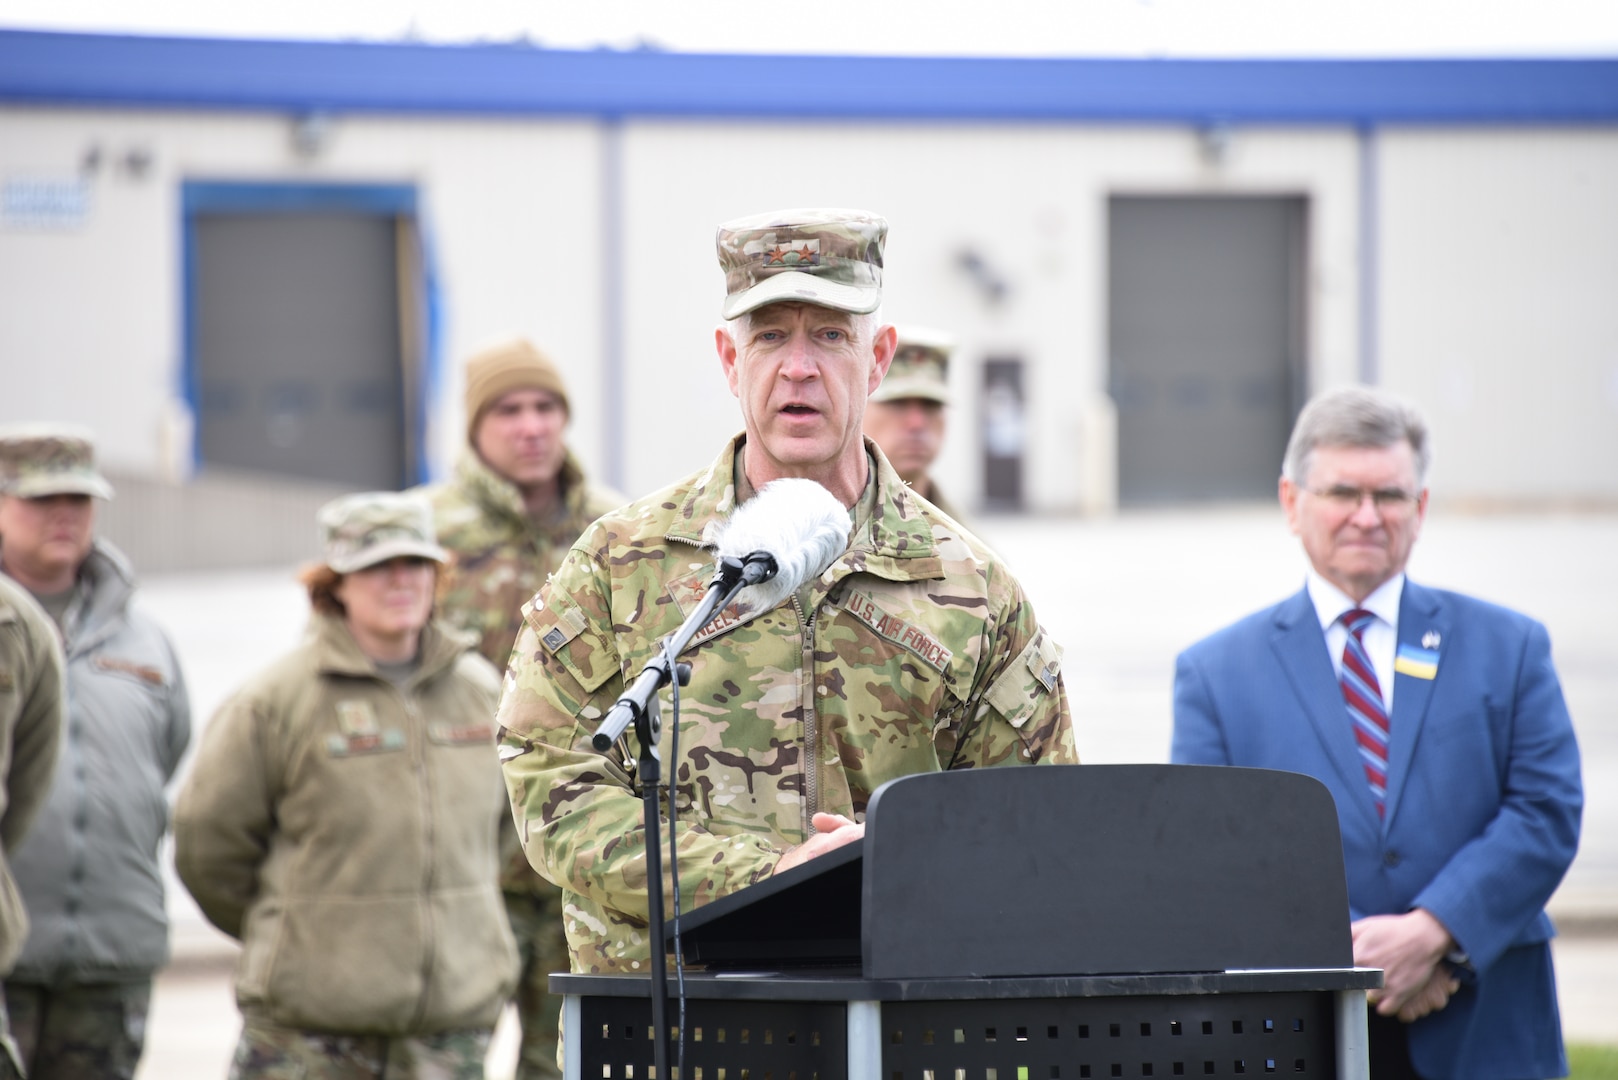 Photo of Maj General Neely (TAG-Illinois) speaking at podium outdoors